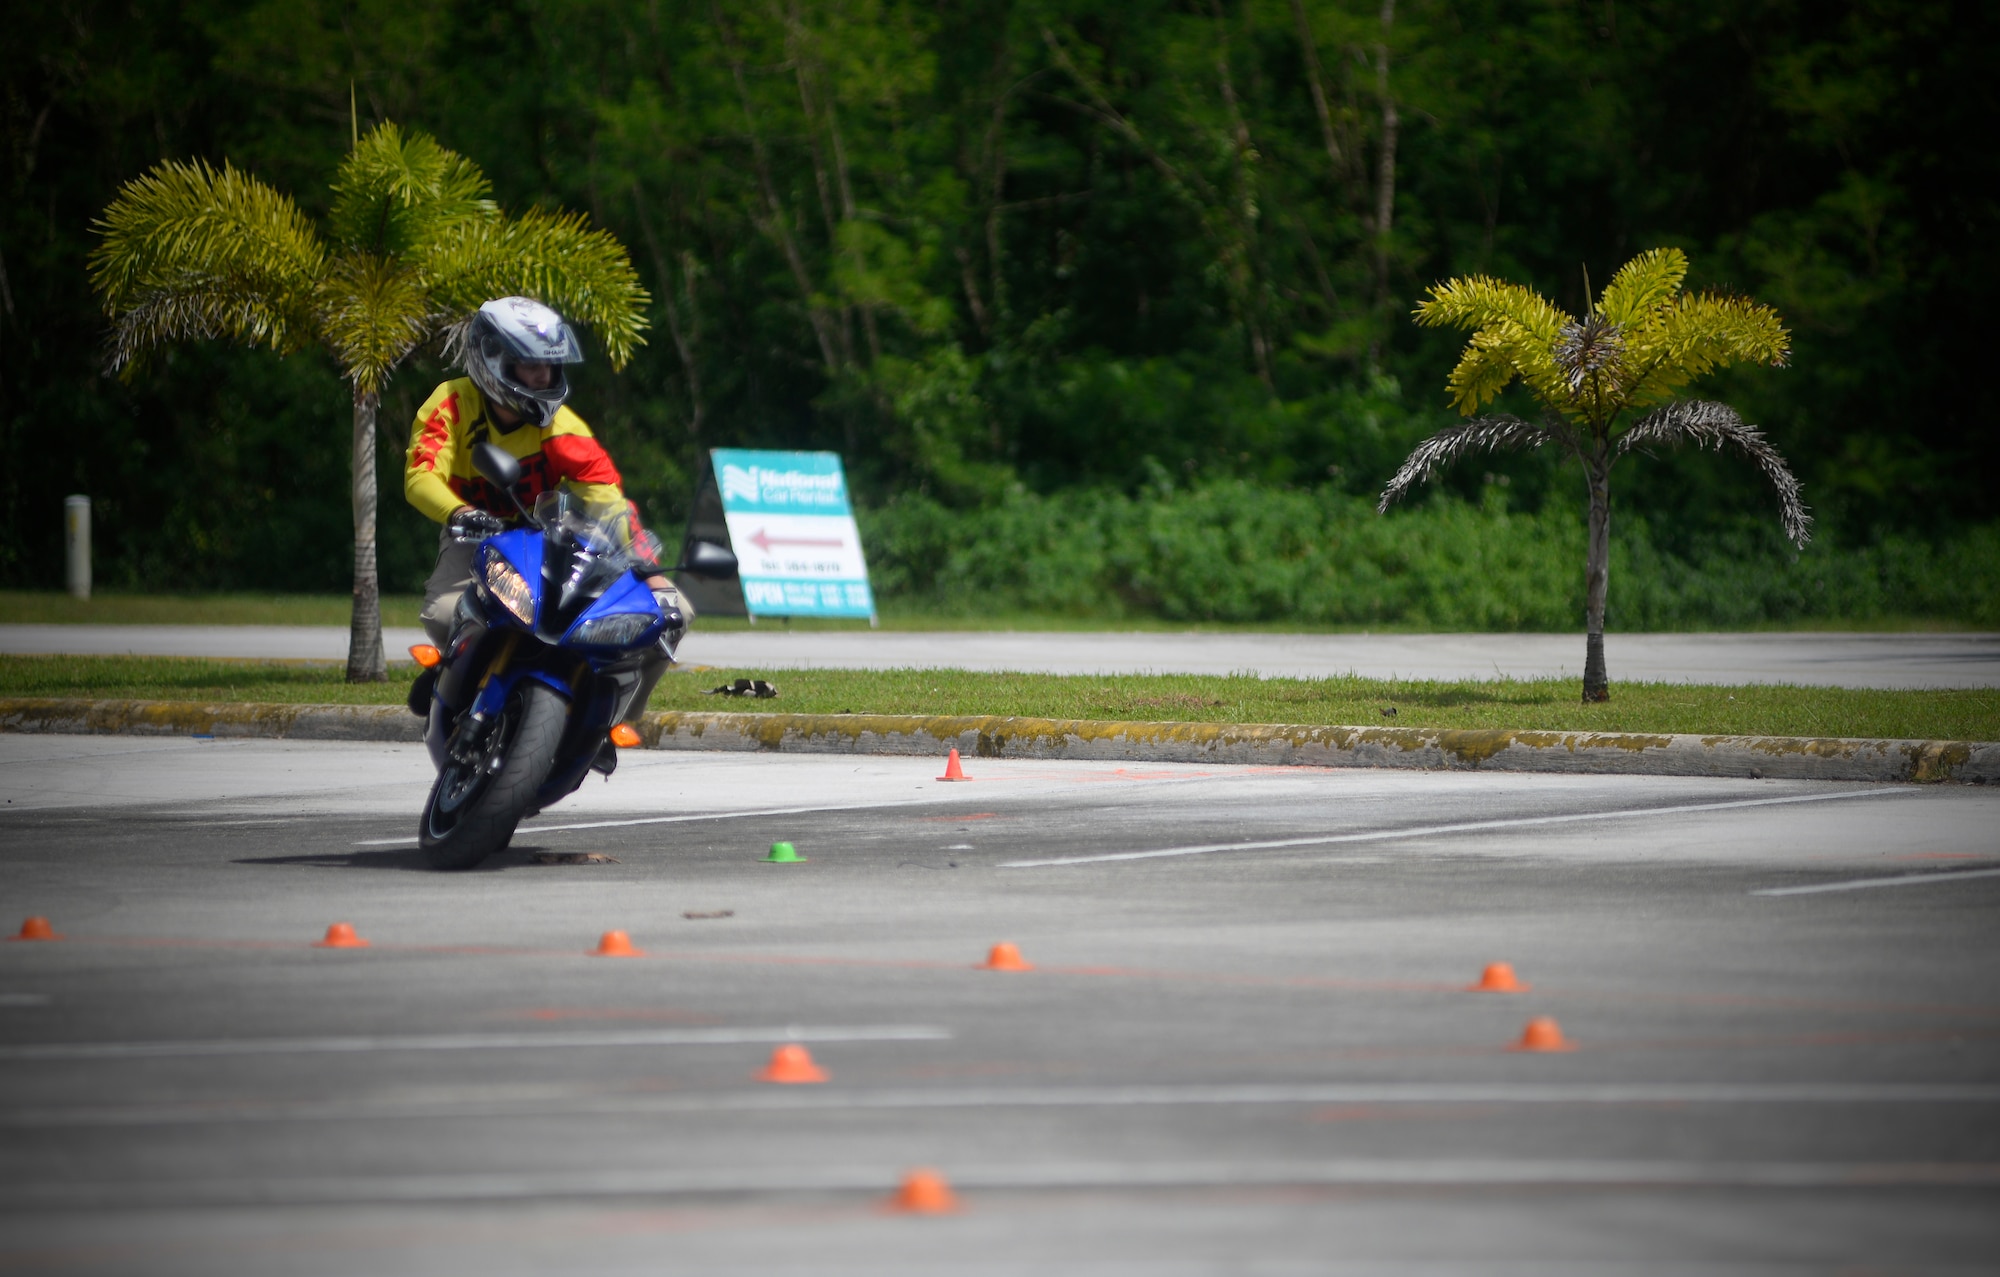 A rider navigates an advanced-difficulty motorcycle skills course Nov. 6, 2015, at Naval Base Guam. Service members reviewed and encouraged safe riding practices during a motorcycle mentorship event, which included a group ride from Andersen Air Force Base to Apra Harbor. (U.S. Air Force photo by Staff Sgt. Alexander W. Riedel/Released)